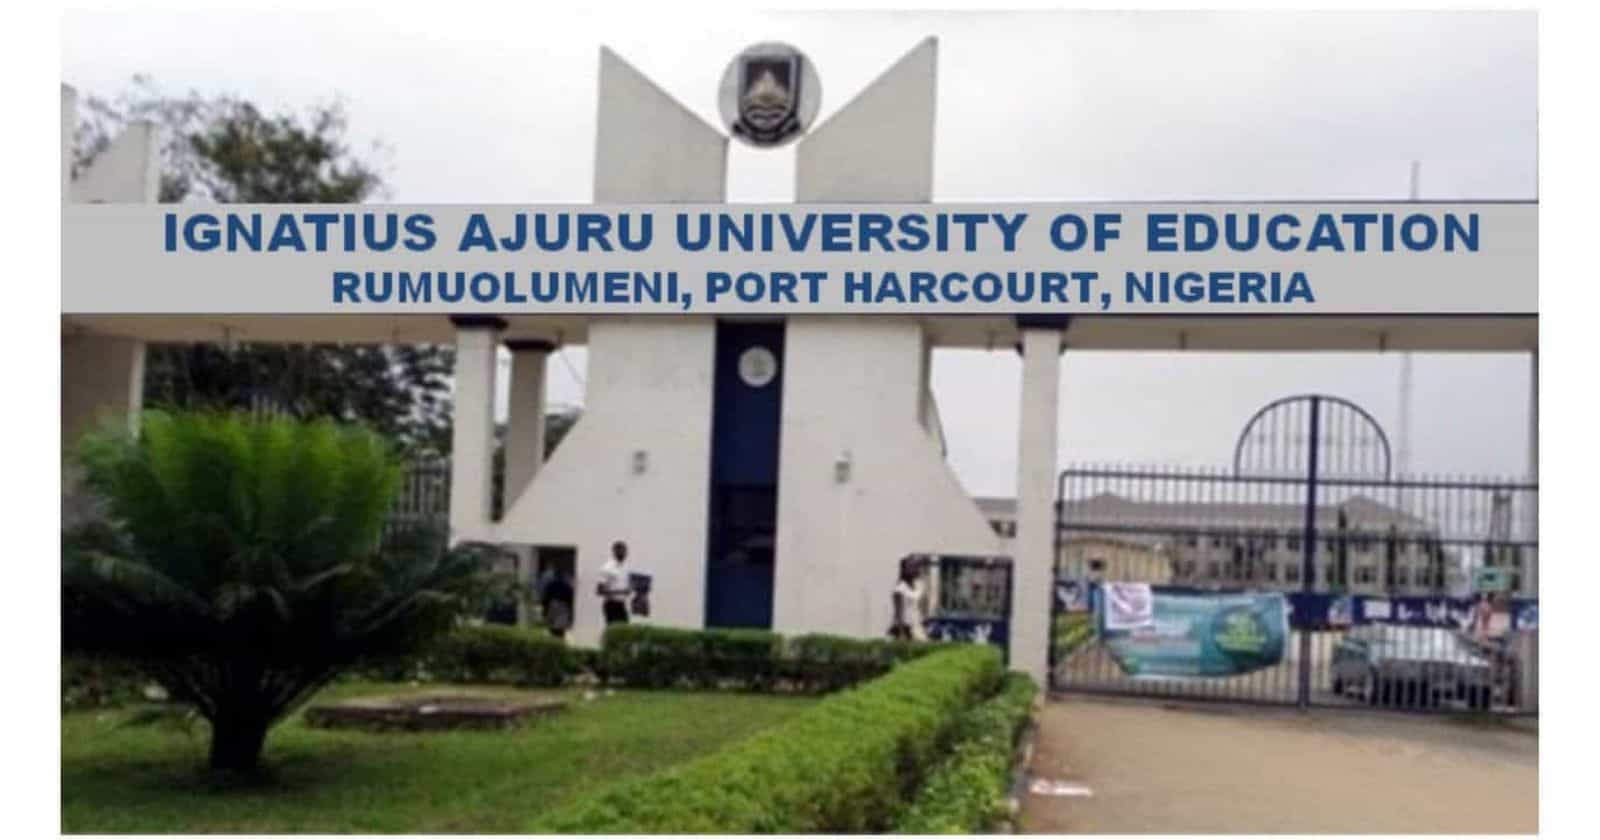 Ignatius Ajuru University Of Education (IAUE), payment procedures for acceptance fee, clearance and registration for 2022/2023 academic session